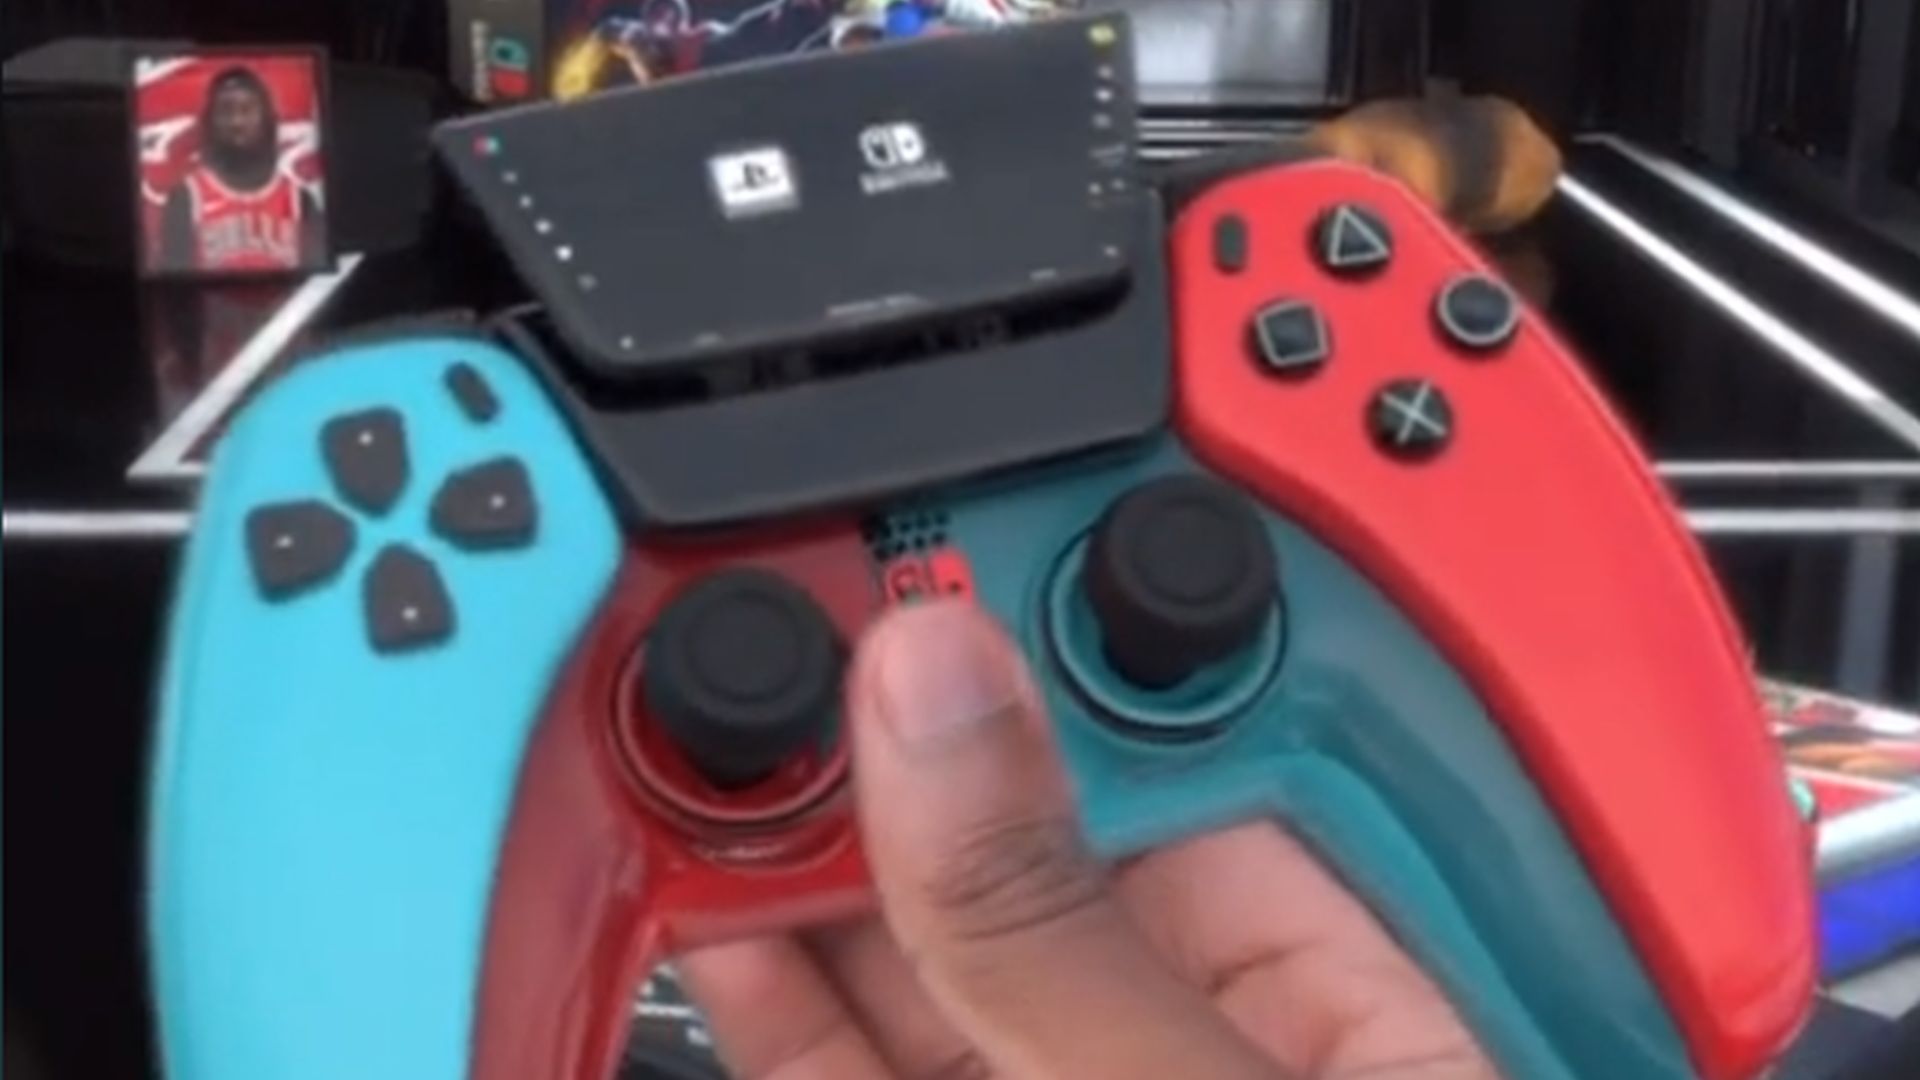 Fan-made PS5 controller shows what a crossover with the Nintendo Switch